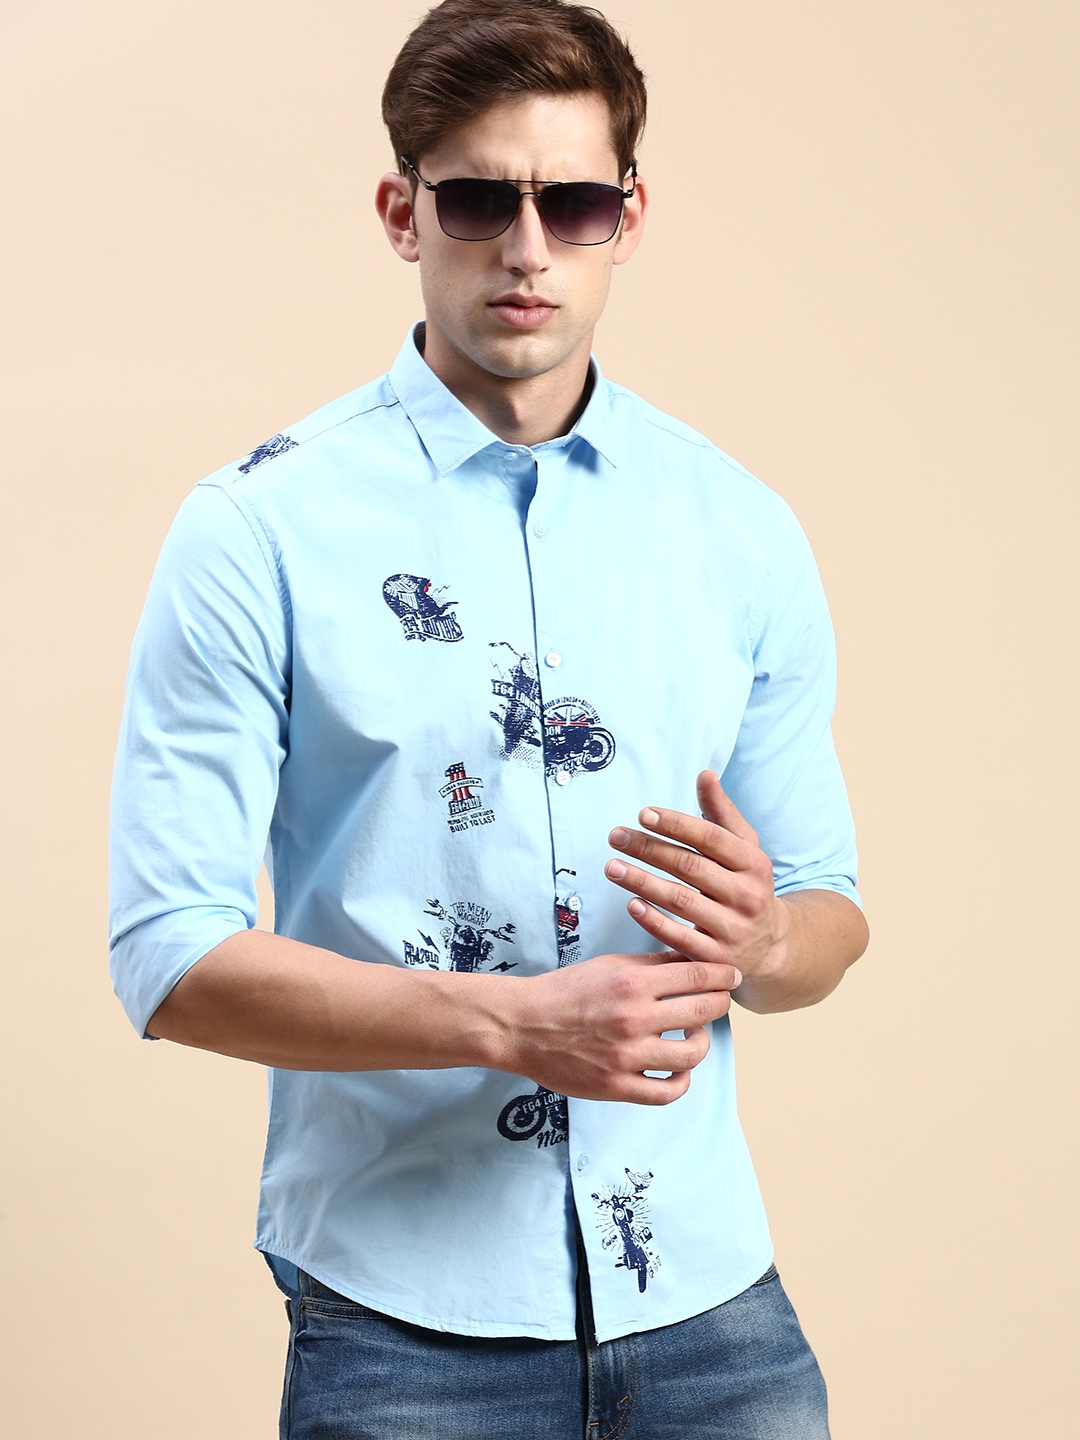 SHOWOFF Men's Spread Collar Turquoise Blue Slim Fit Printed Shirt